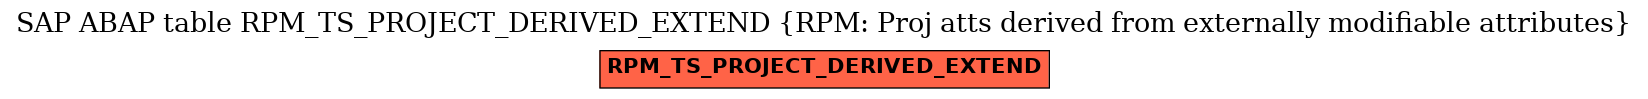 E-R Diagram for table RPM_TS_PROJECT_DERIVED_EXTEND (RPM: Proj atts derived from externally modifiable attributes)